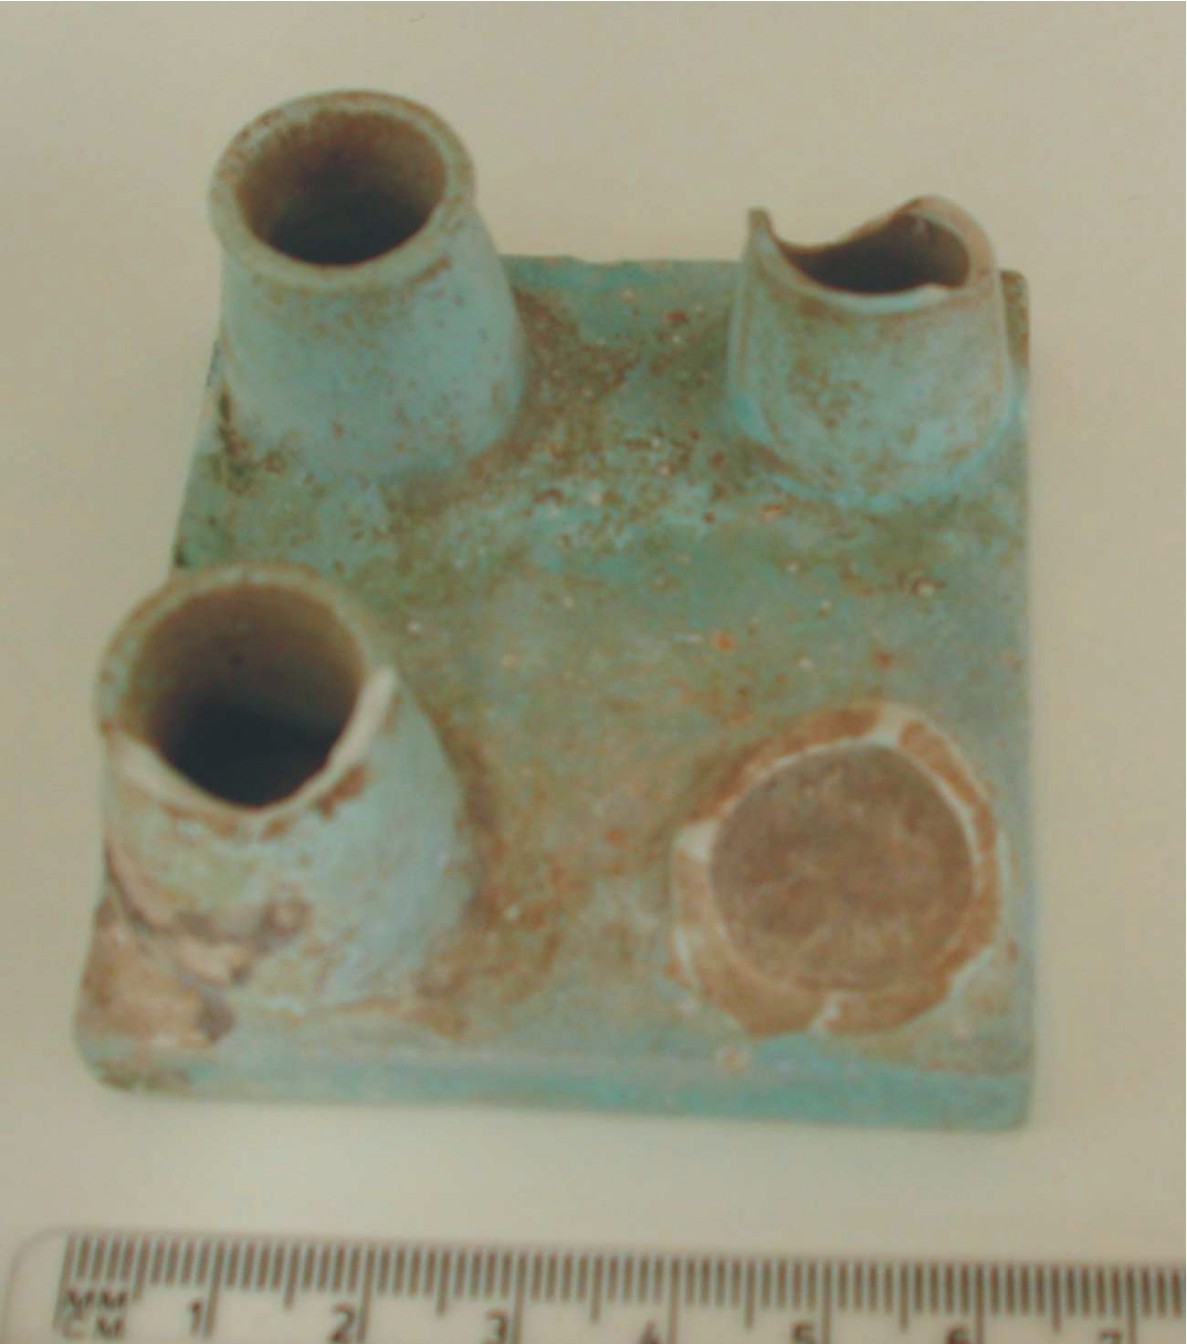 Image for: Faience tablet